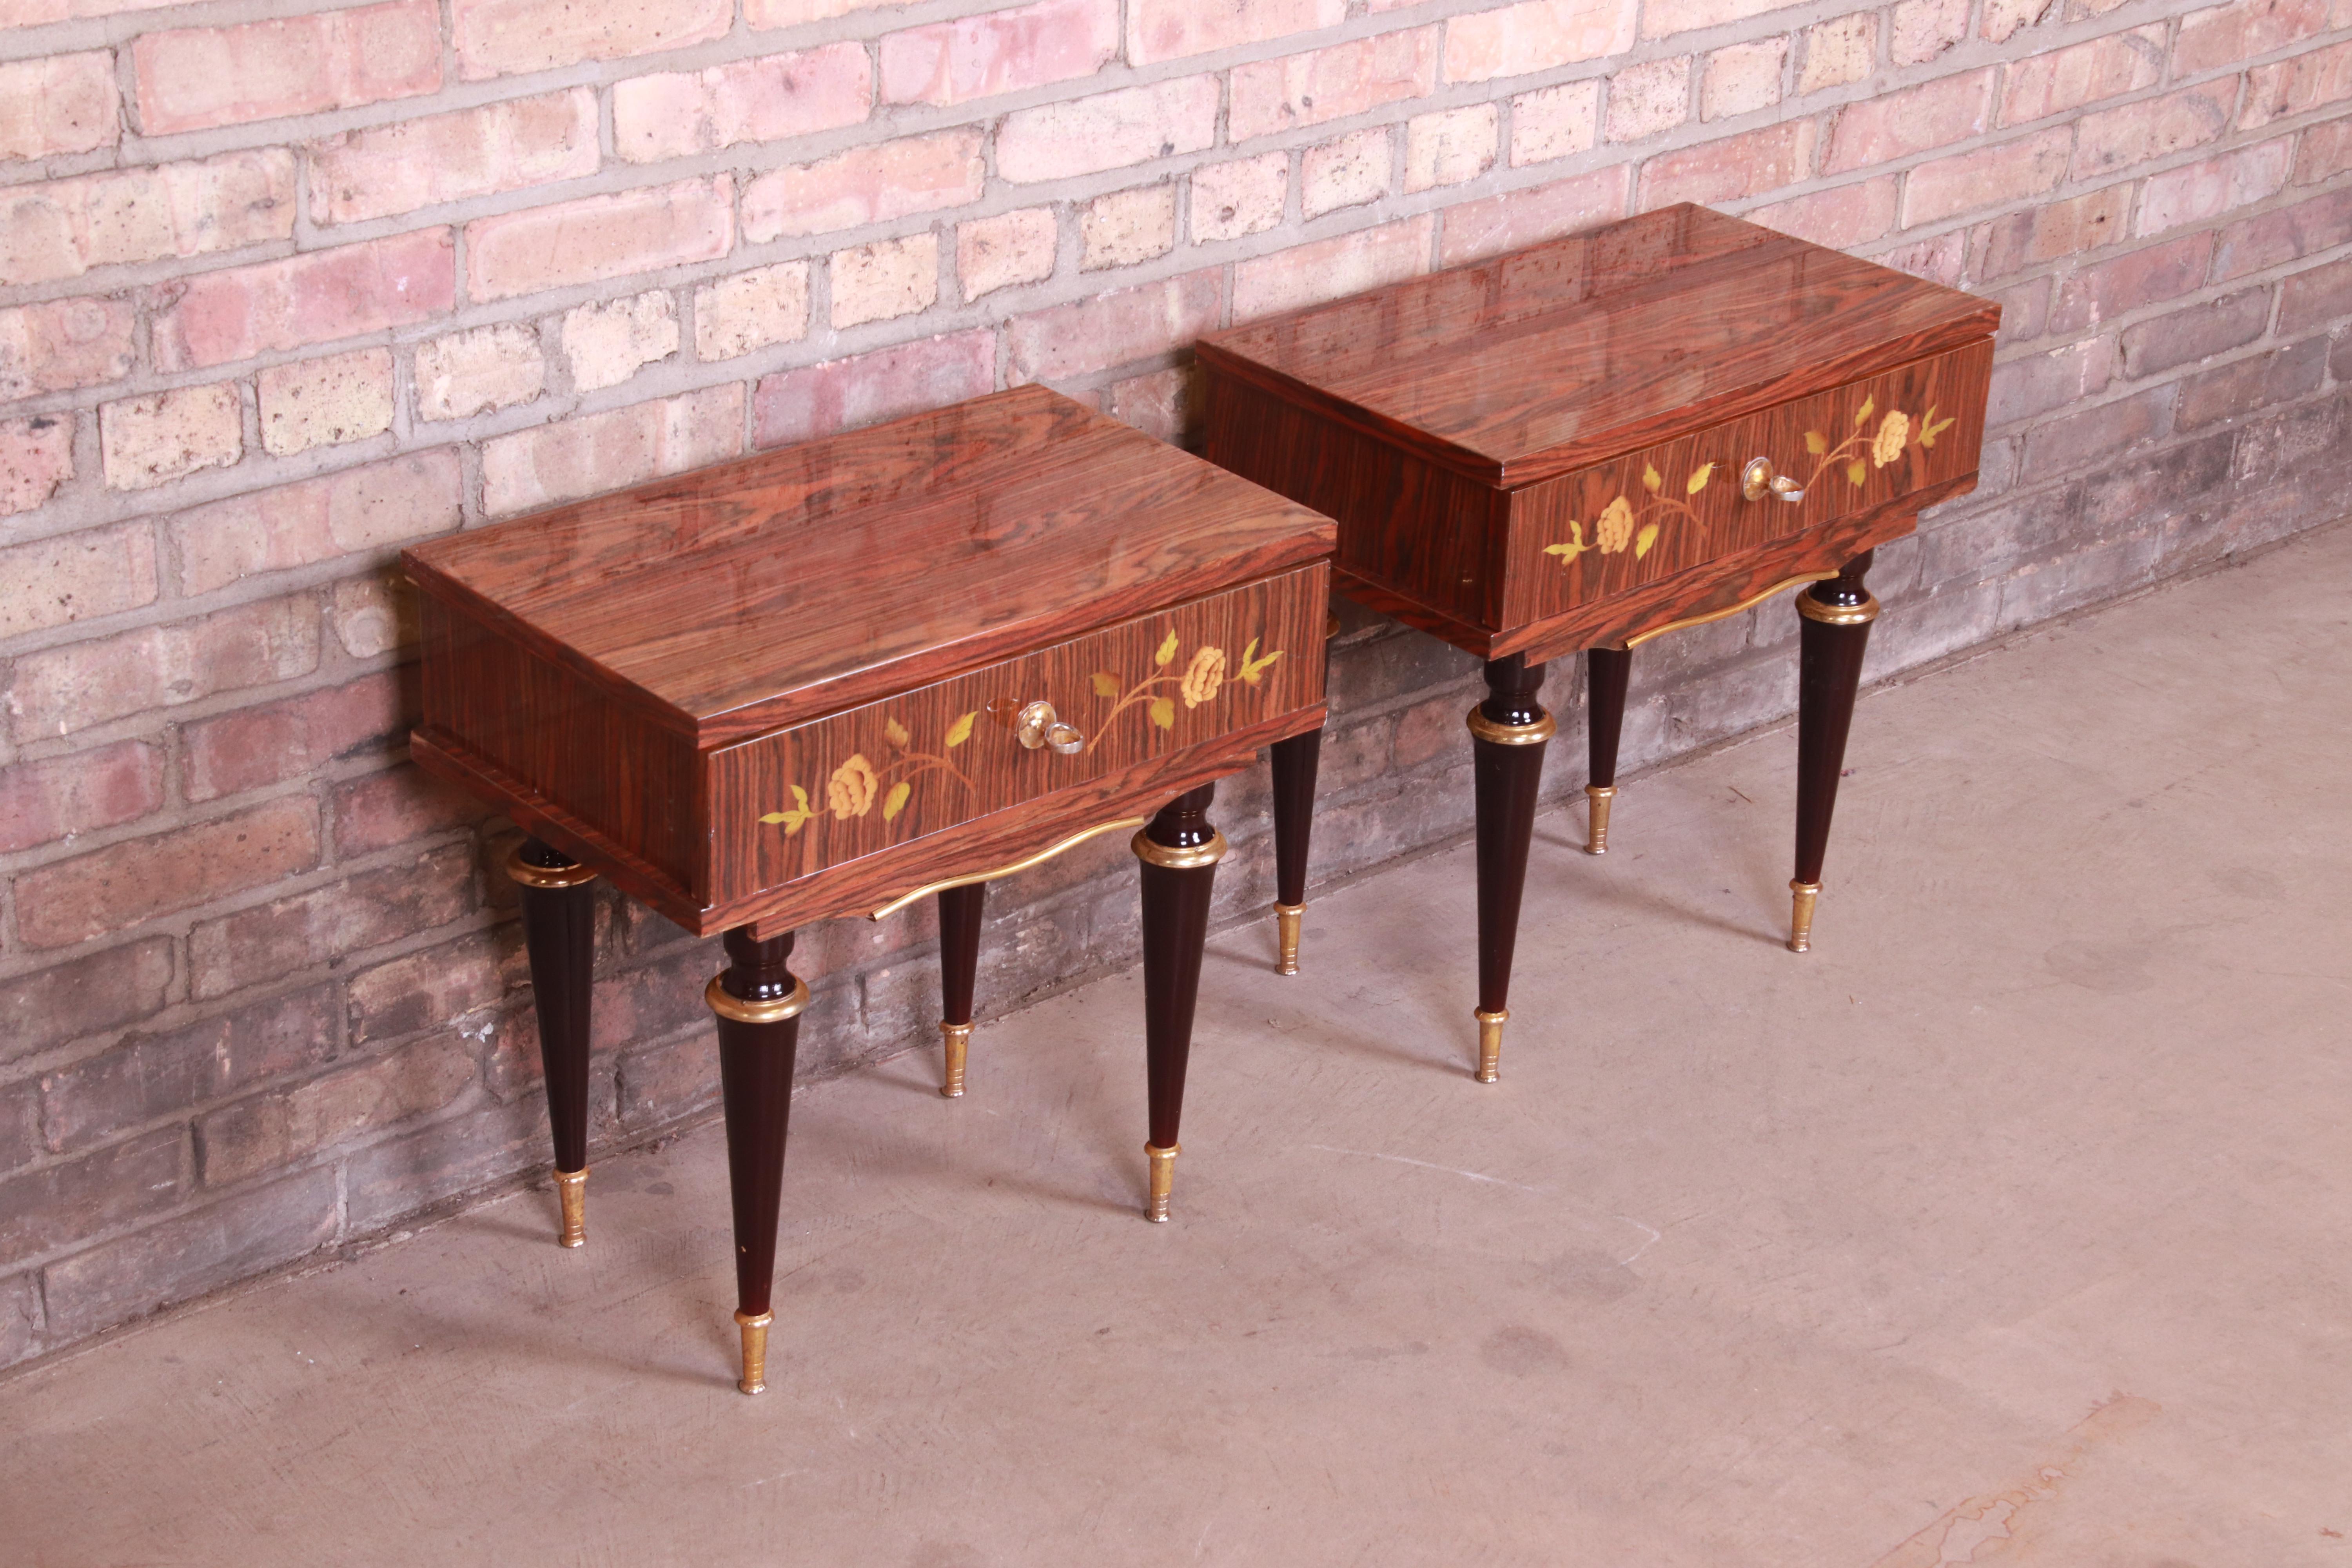 Brass French Art Deco Macassar Ebony Inlaid Marquetry Nightstands, Circa 1950s For Sale